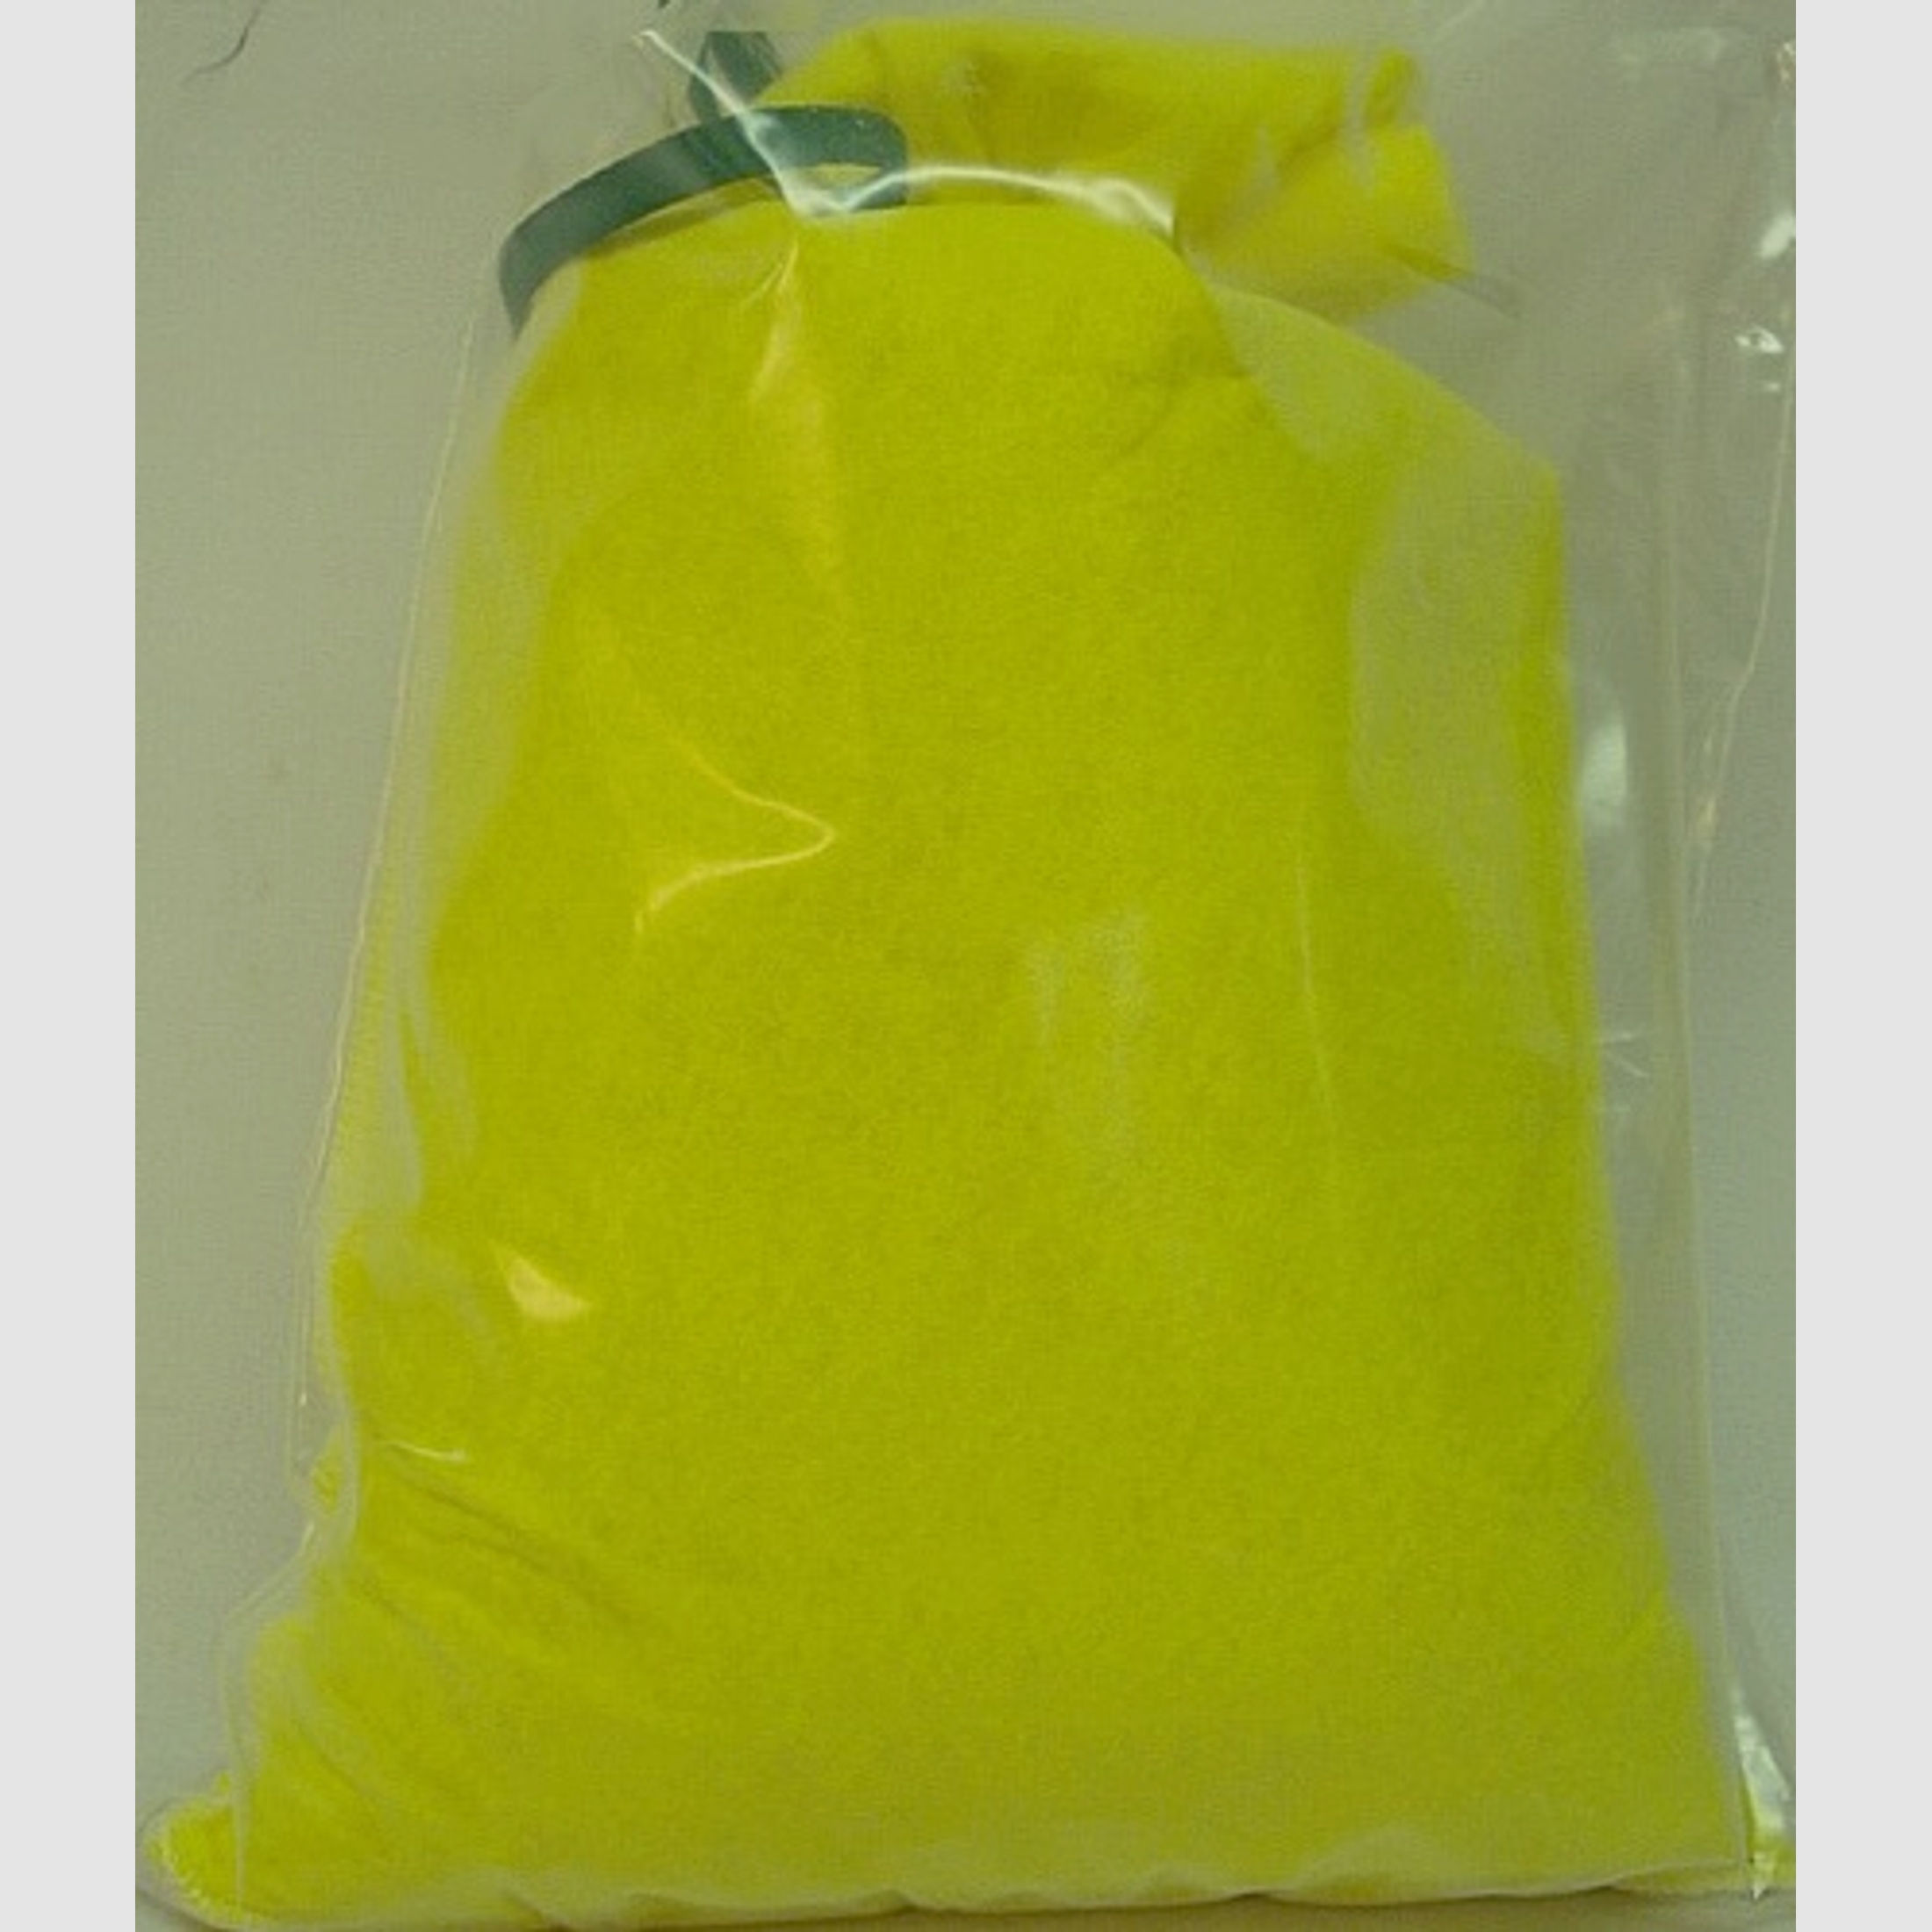 Raumentfeuchter Multi Dry - 1 kg